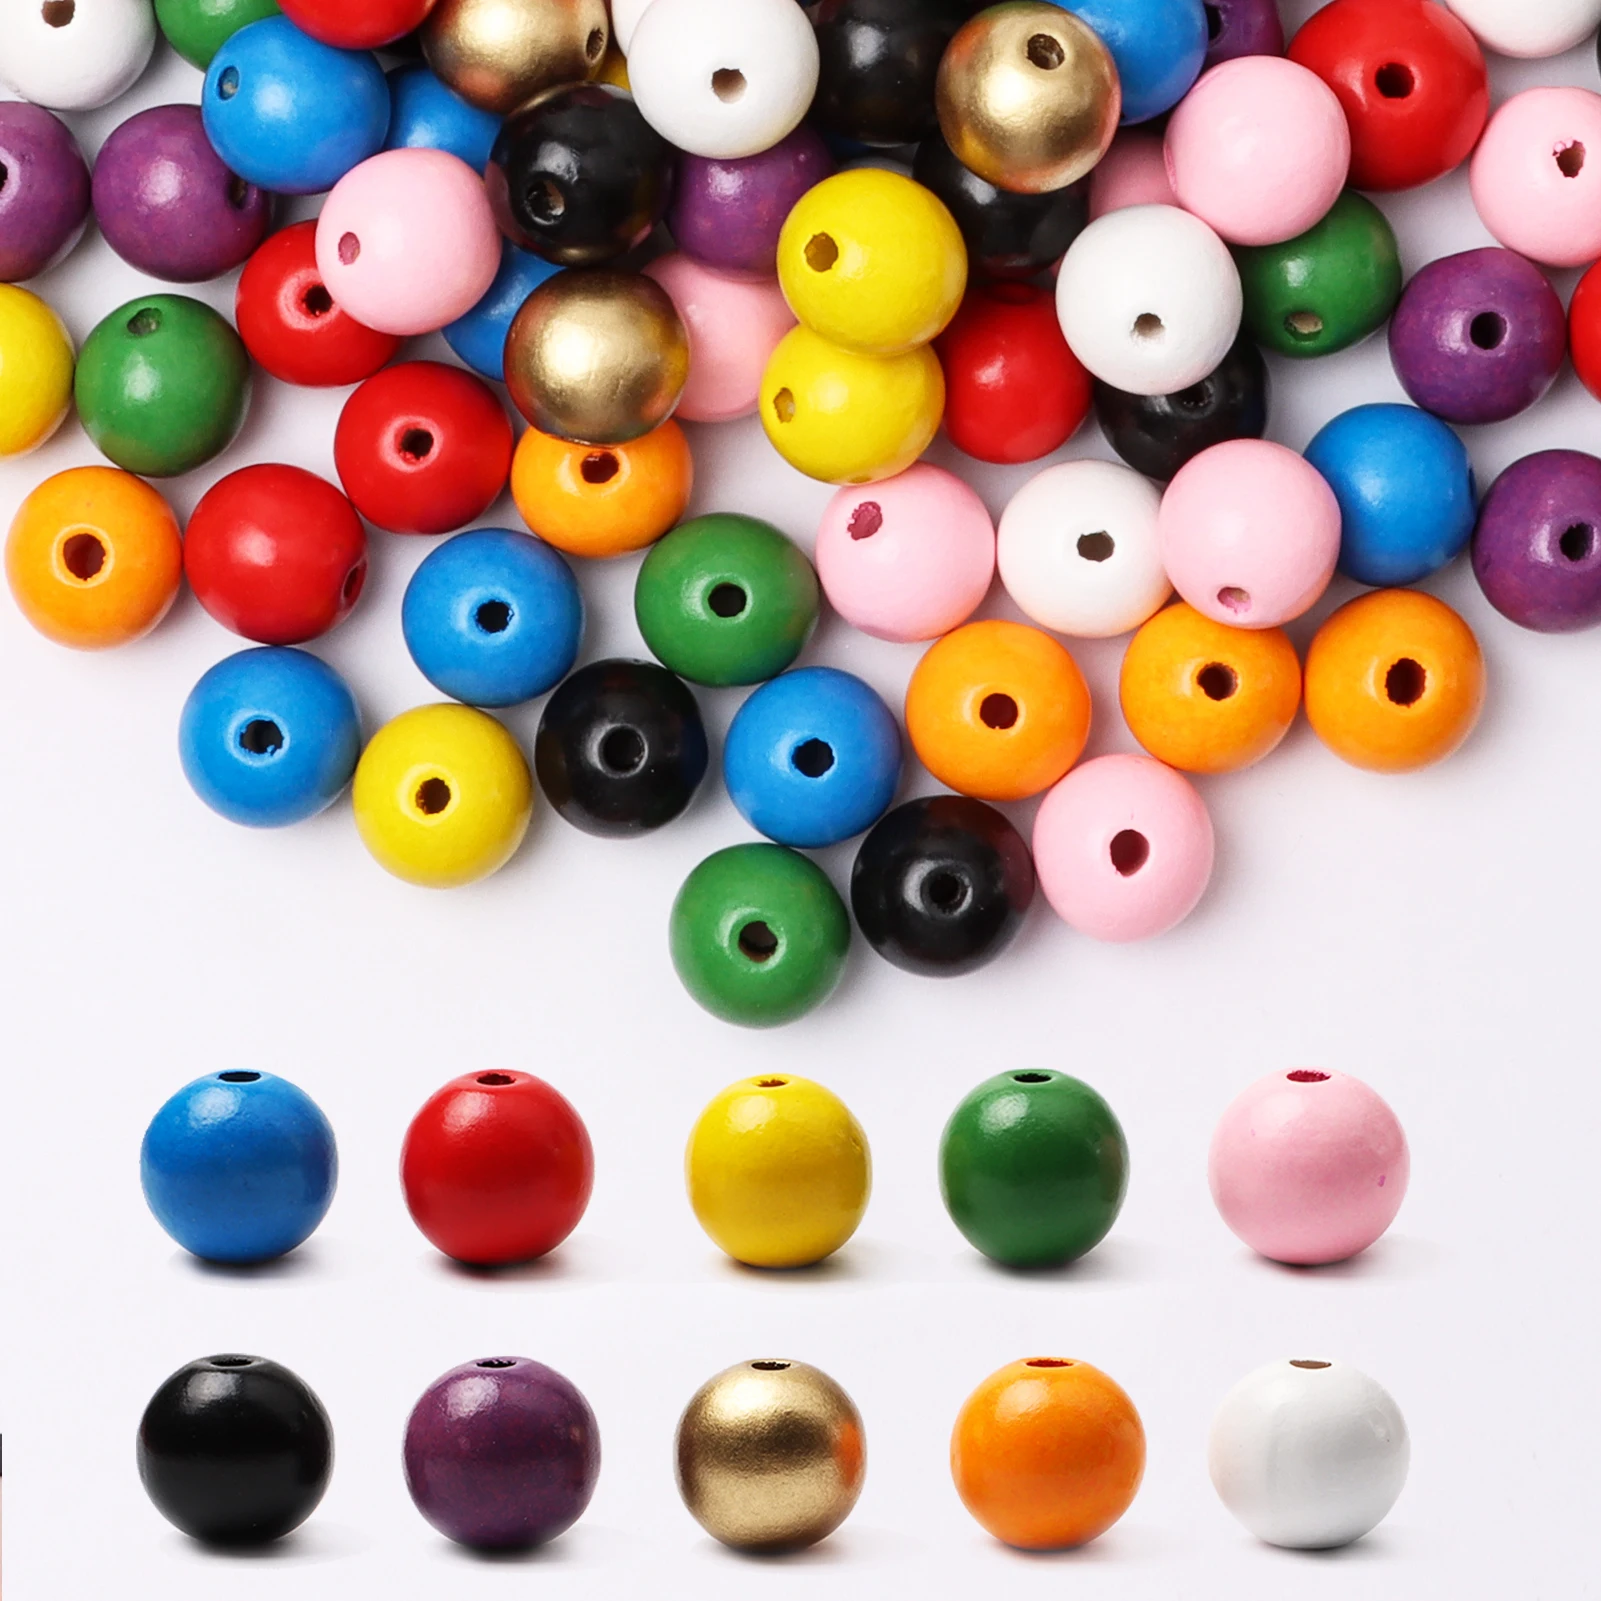 

Colorful Wood Beads,8/10/12/14/16/20/22MM Colored Natural Wooden Round Spacer Handmade Beads in Ten Colors for Garland,Farmhouse